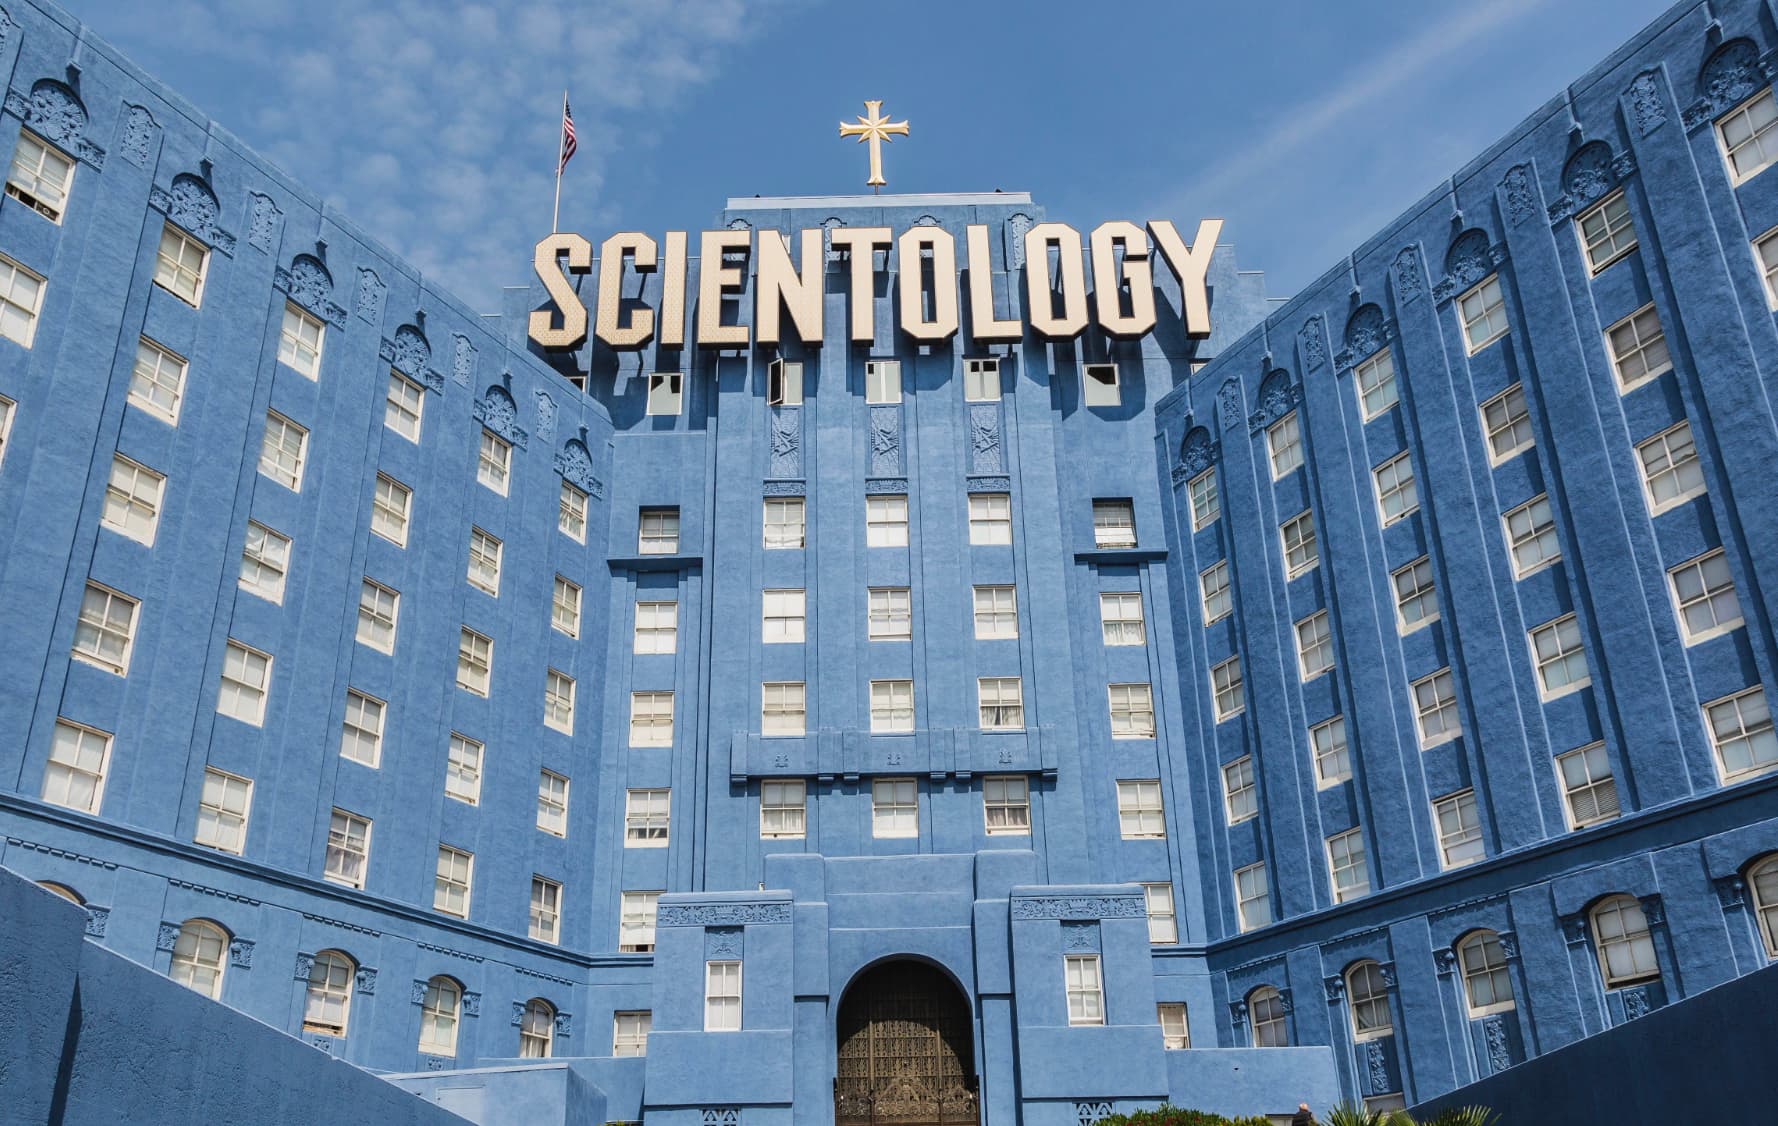 church of scientology - Scientology Aa